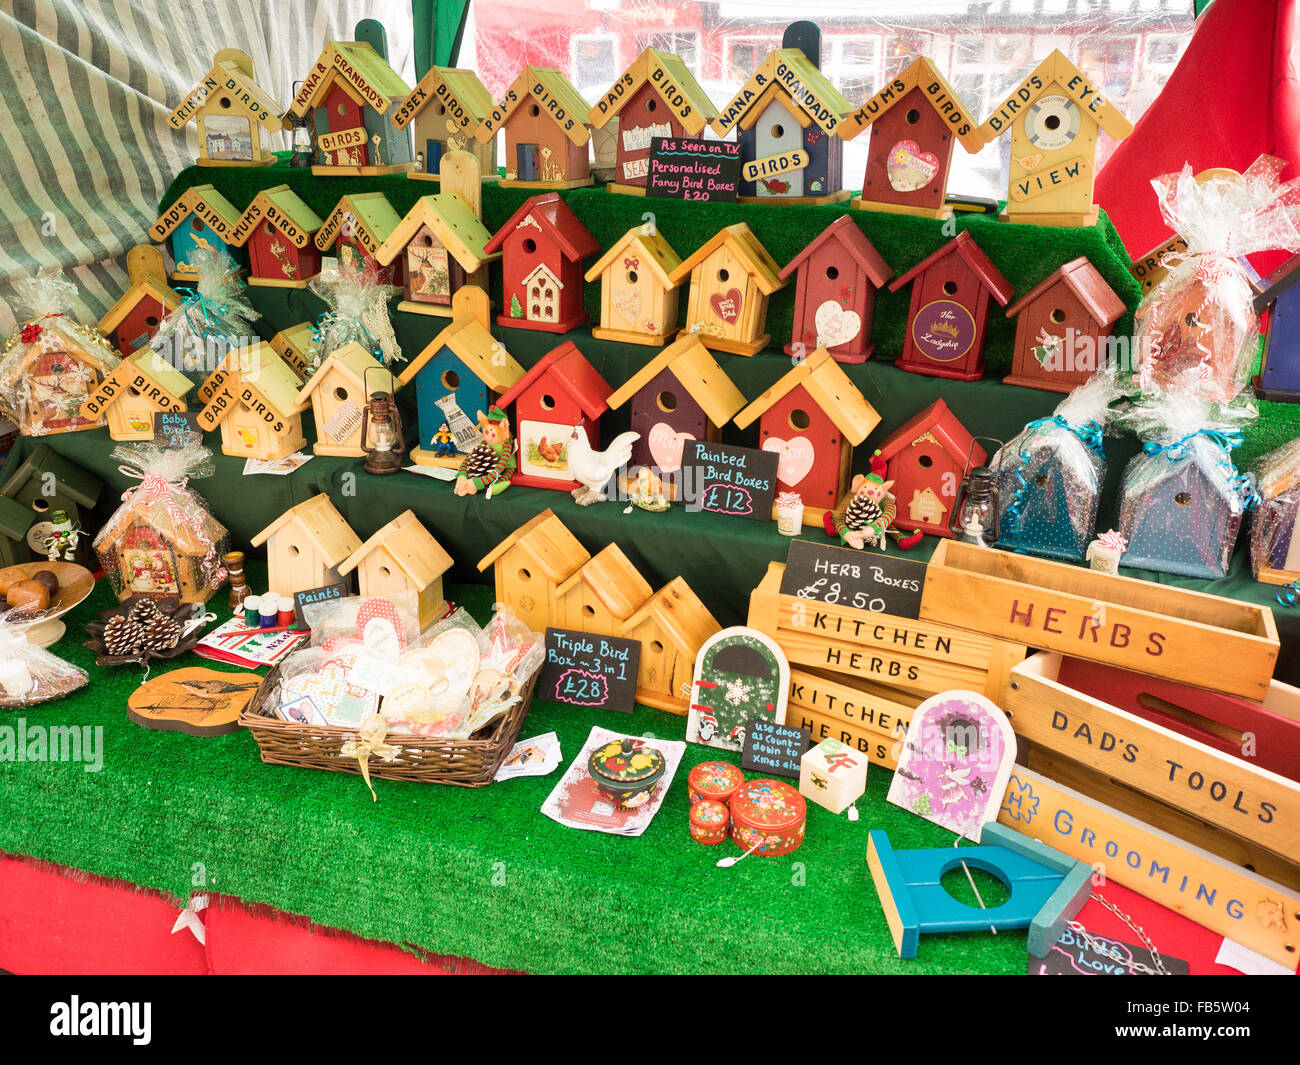 Wooden Bird Boxes Christmas Market Stall Presents Gifts Stock Photo